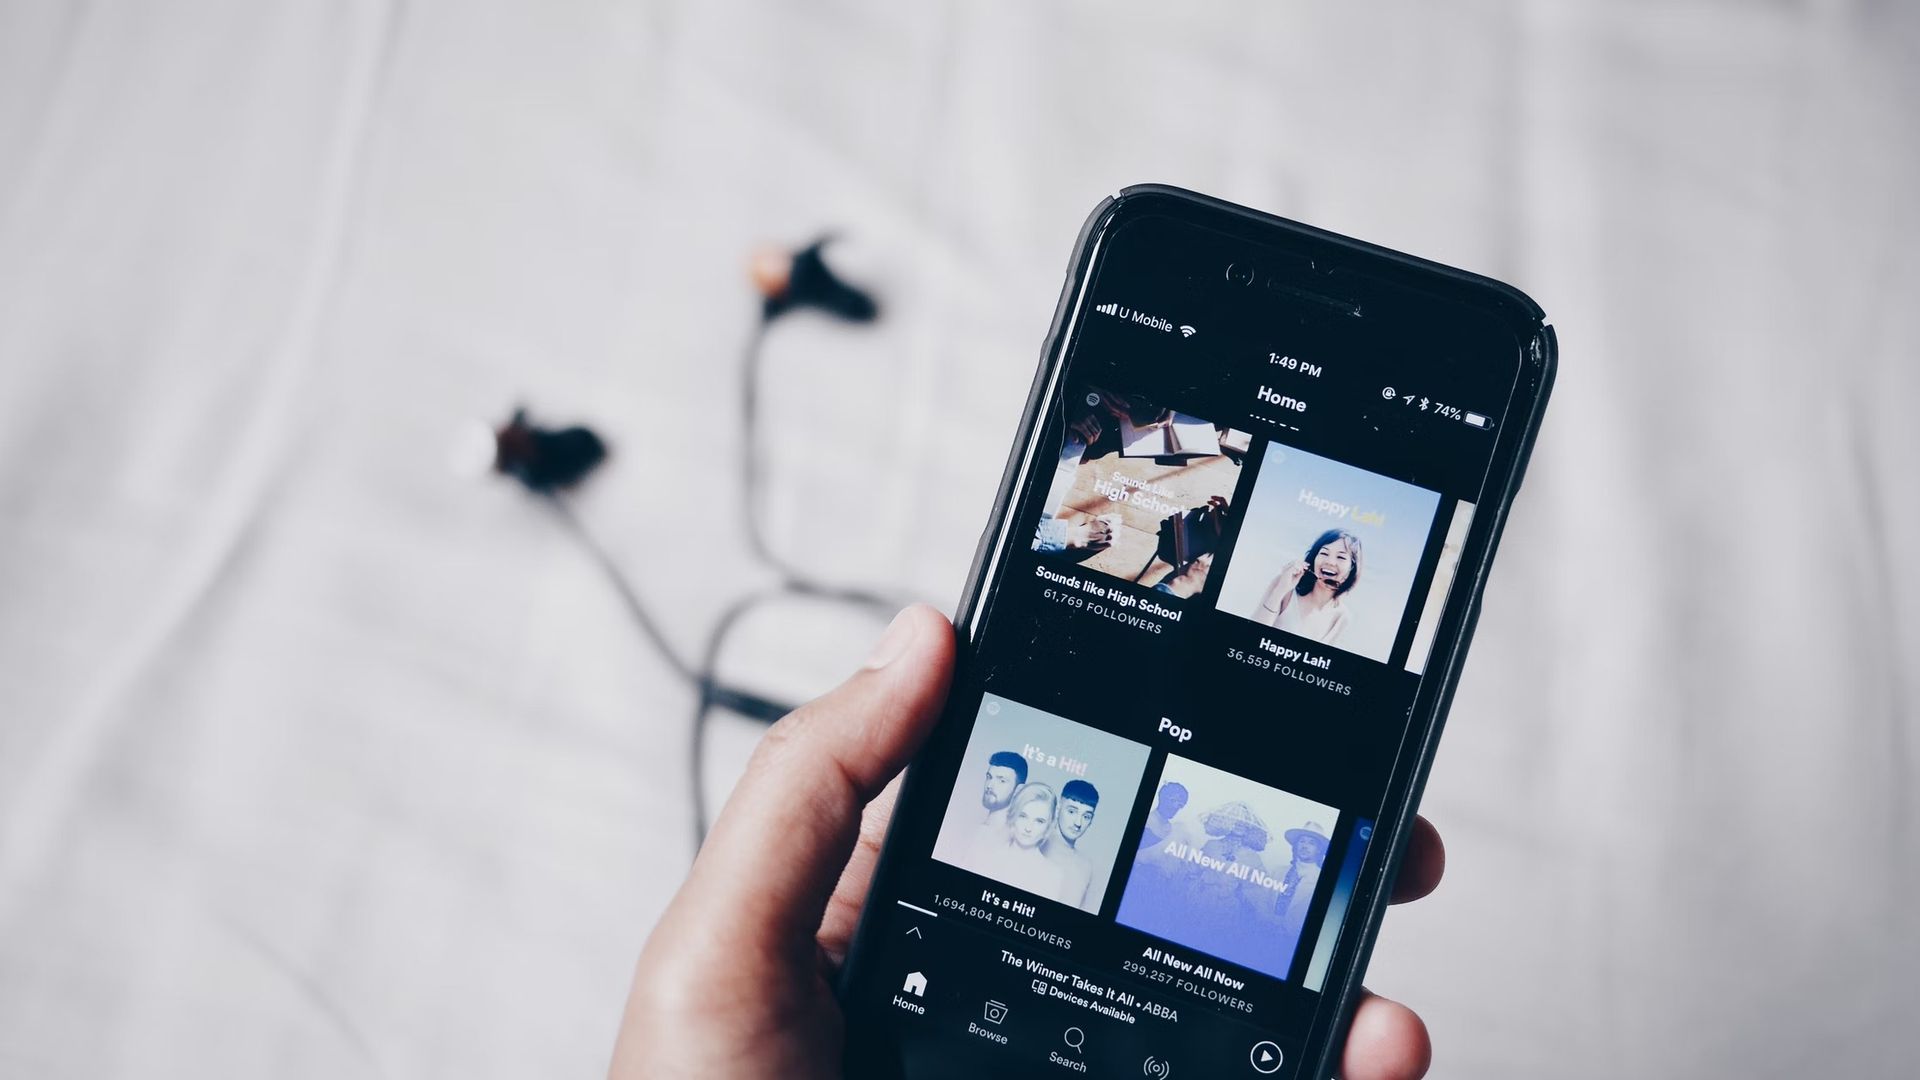 Spotify Community is in the works, it is a new feature that would allow mobile users to see what music their friends are listening to in real time.